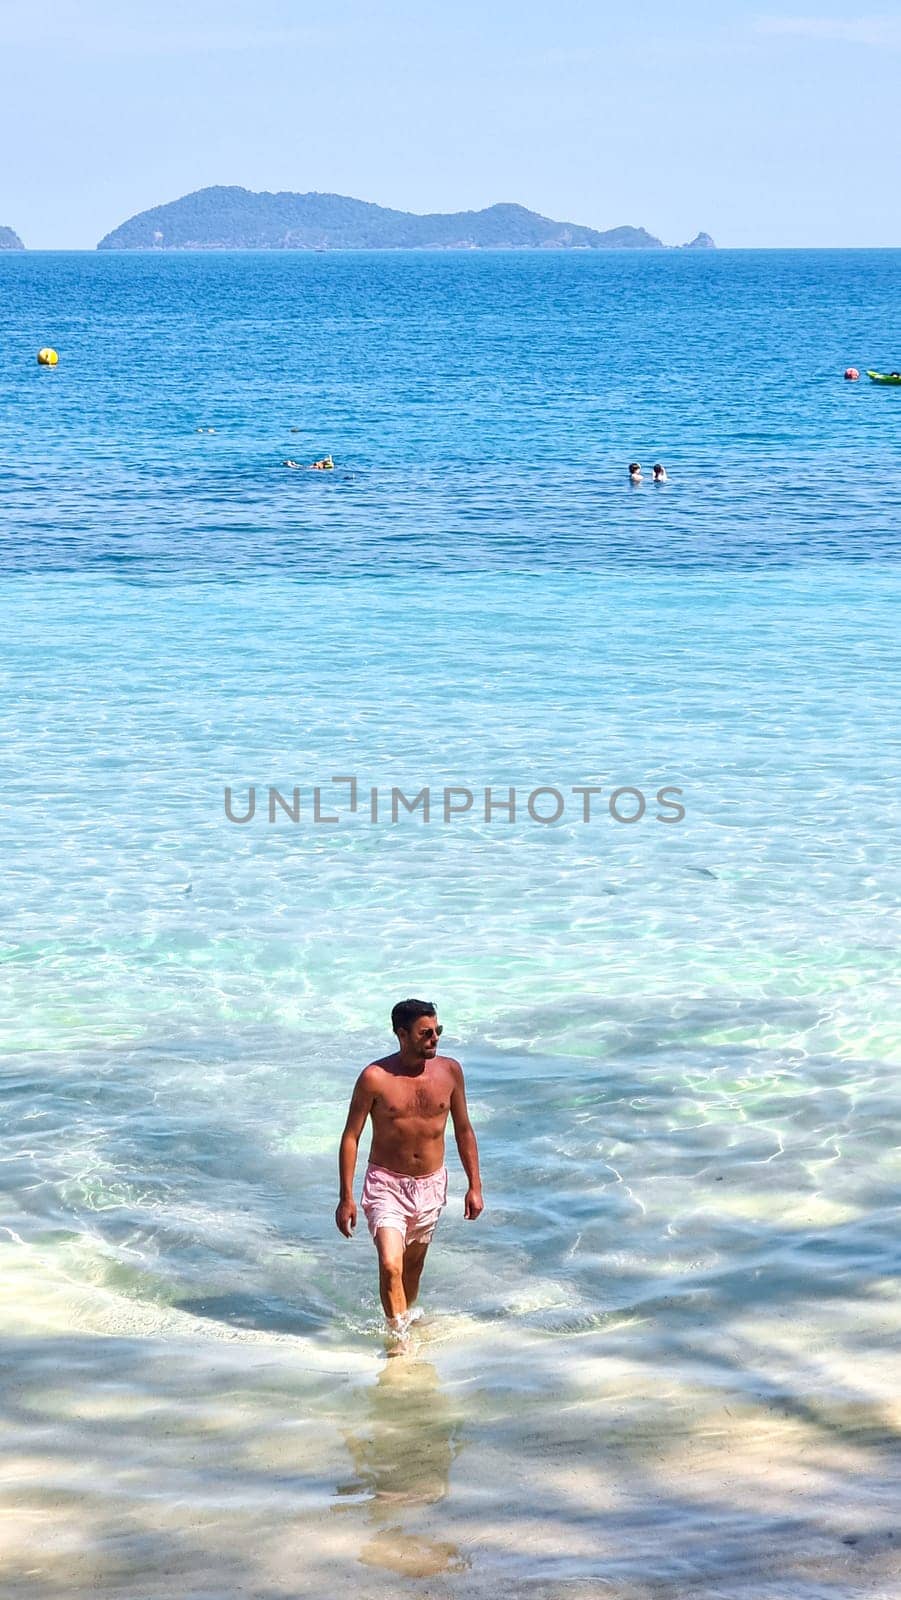 A man with a rugged appearance walks gracefully out of the glistening ocean water, the droplets sparkle in the sunlight as he emerges onto the sandy beach. Koh Wai Thailand